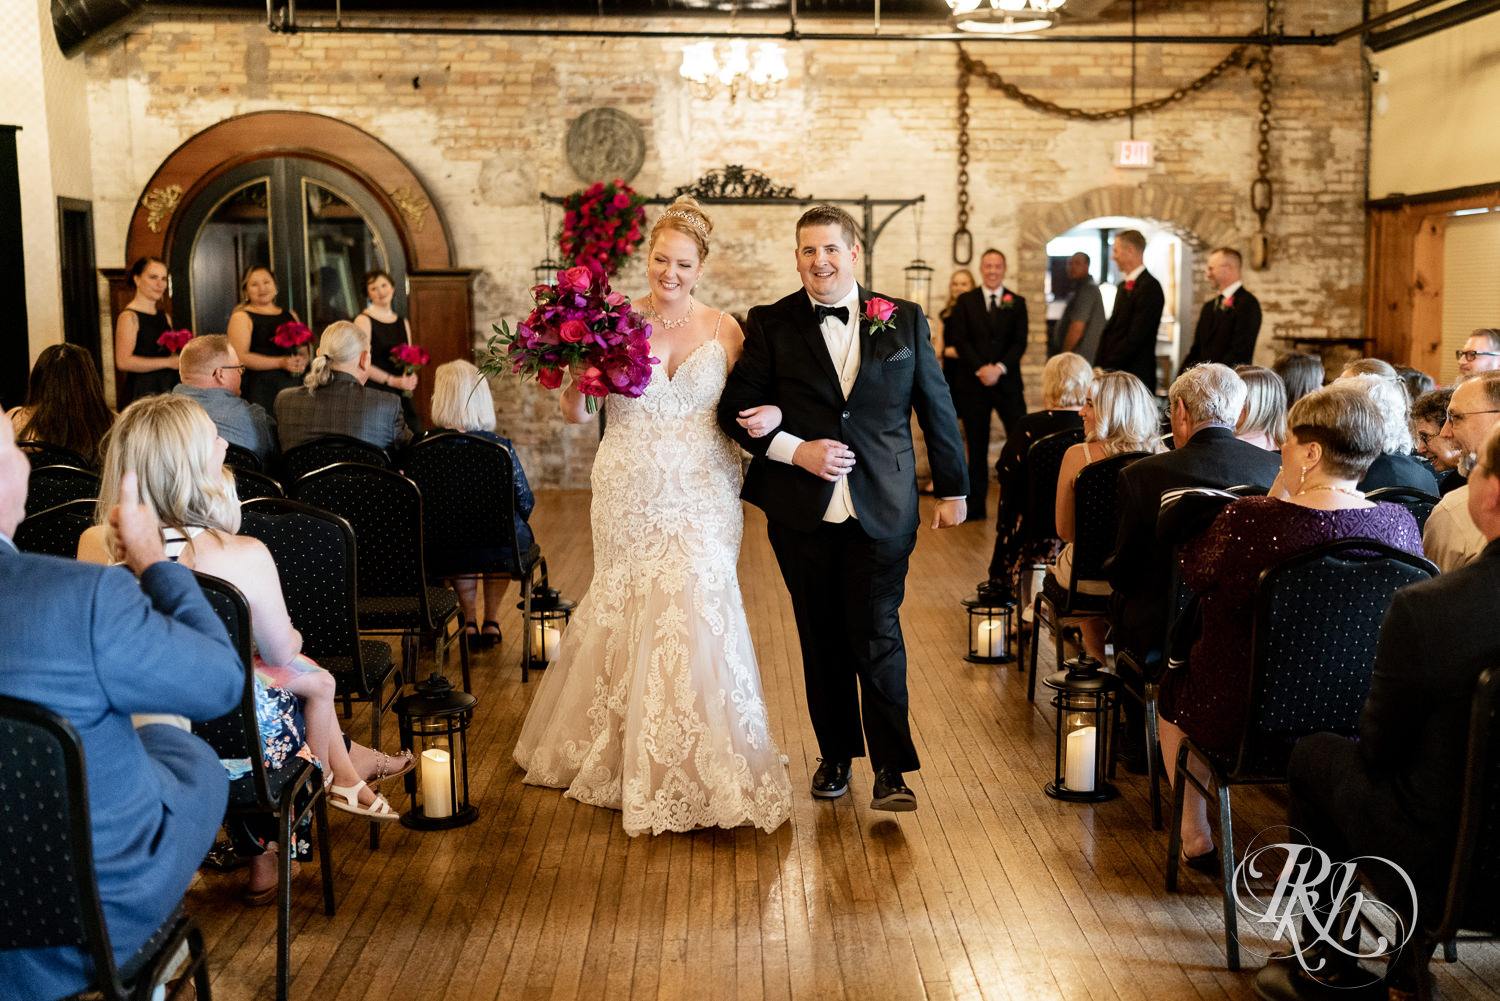 Bride and groom walking down aisle after ceremony at Kellerman's Event Center in White Bear Lake, Minnesota.